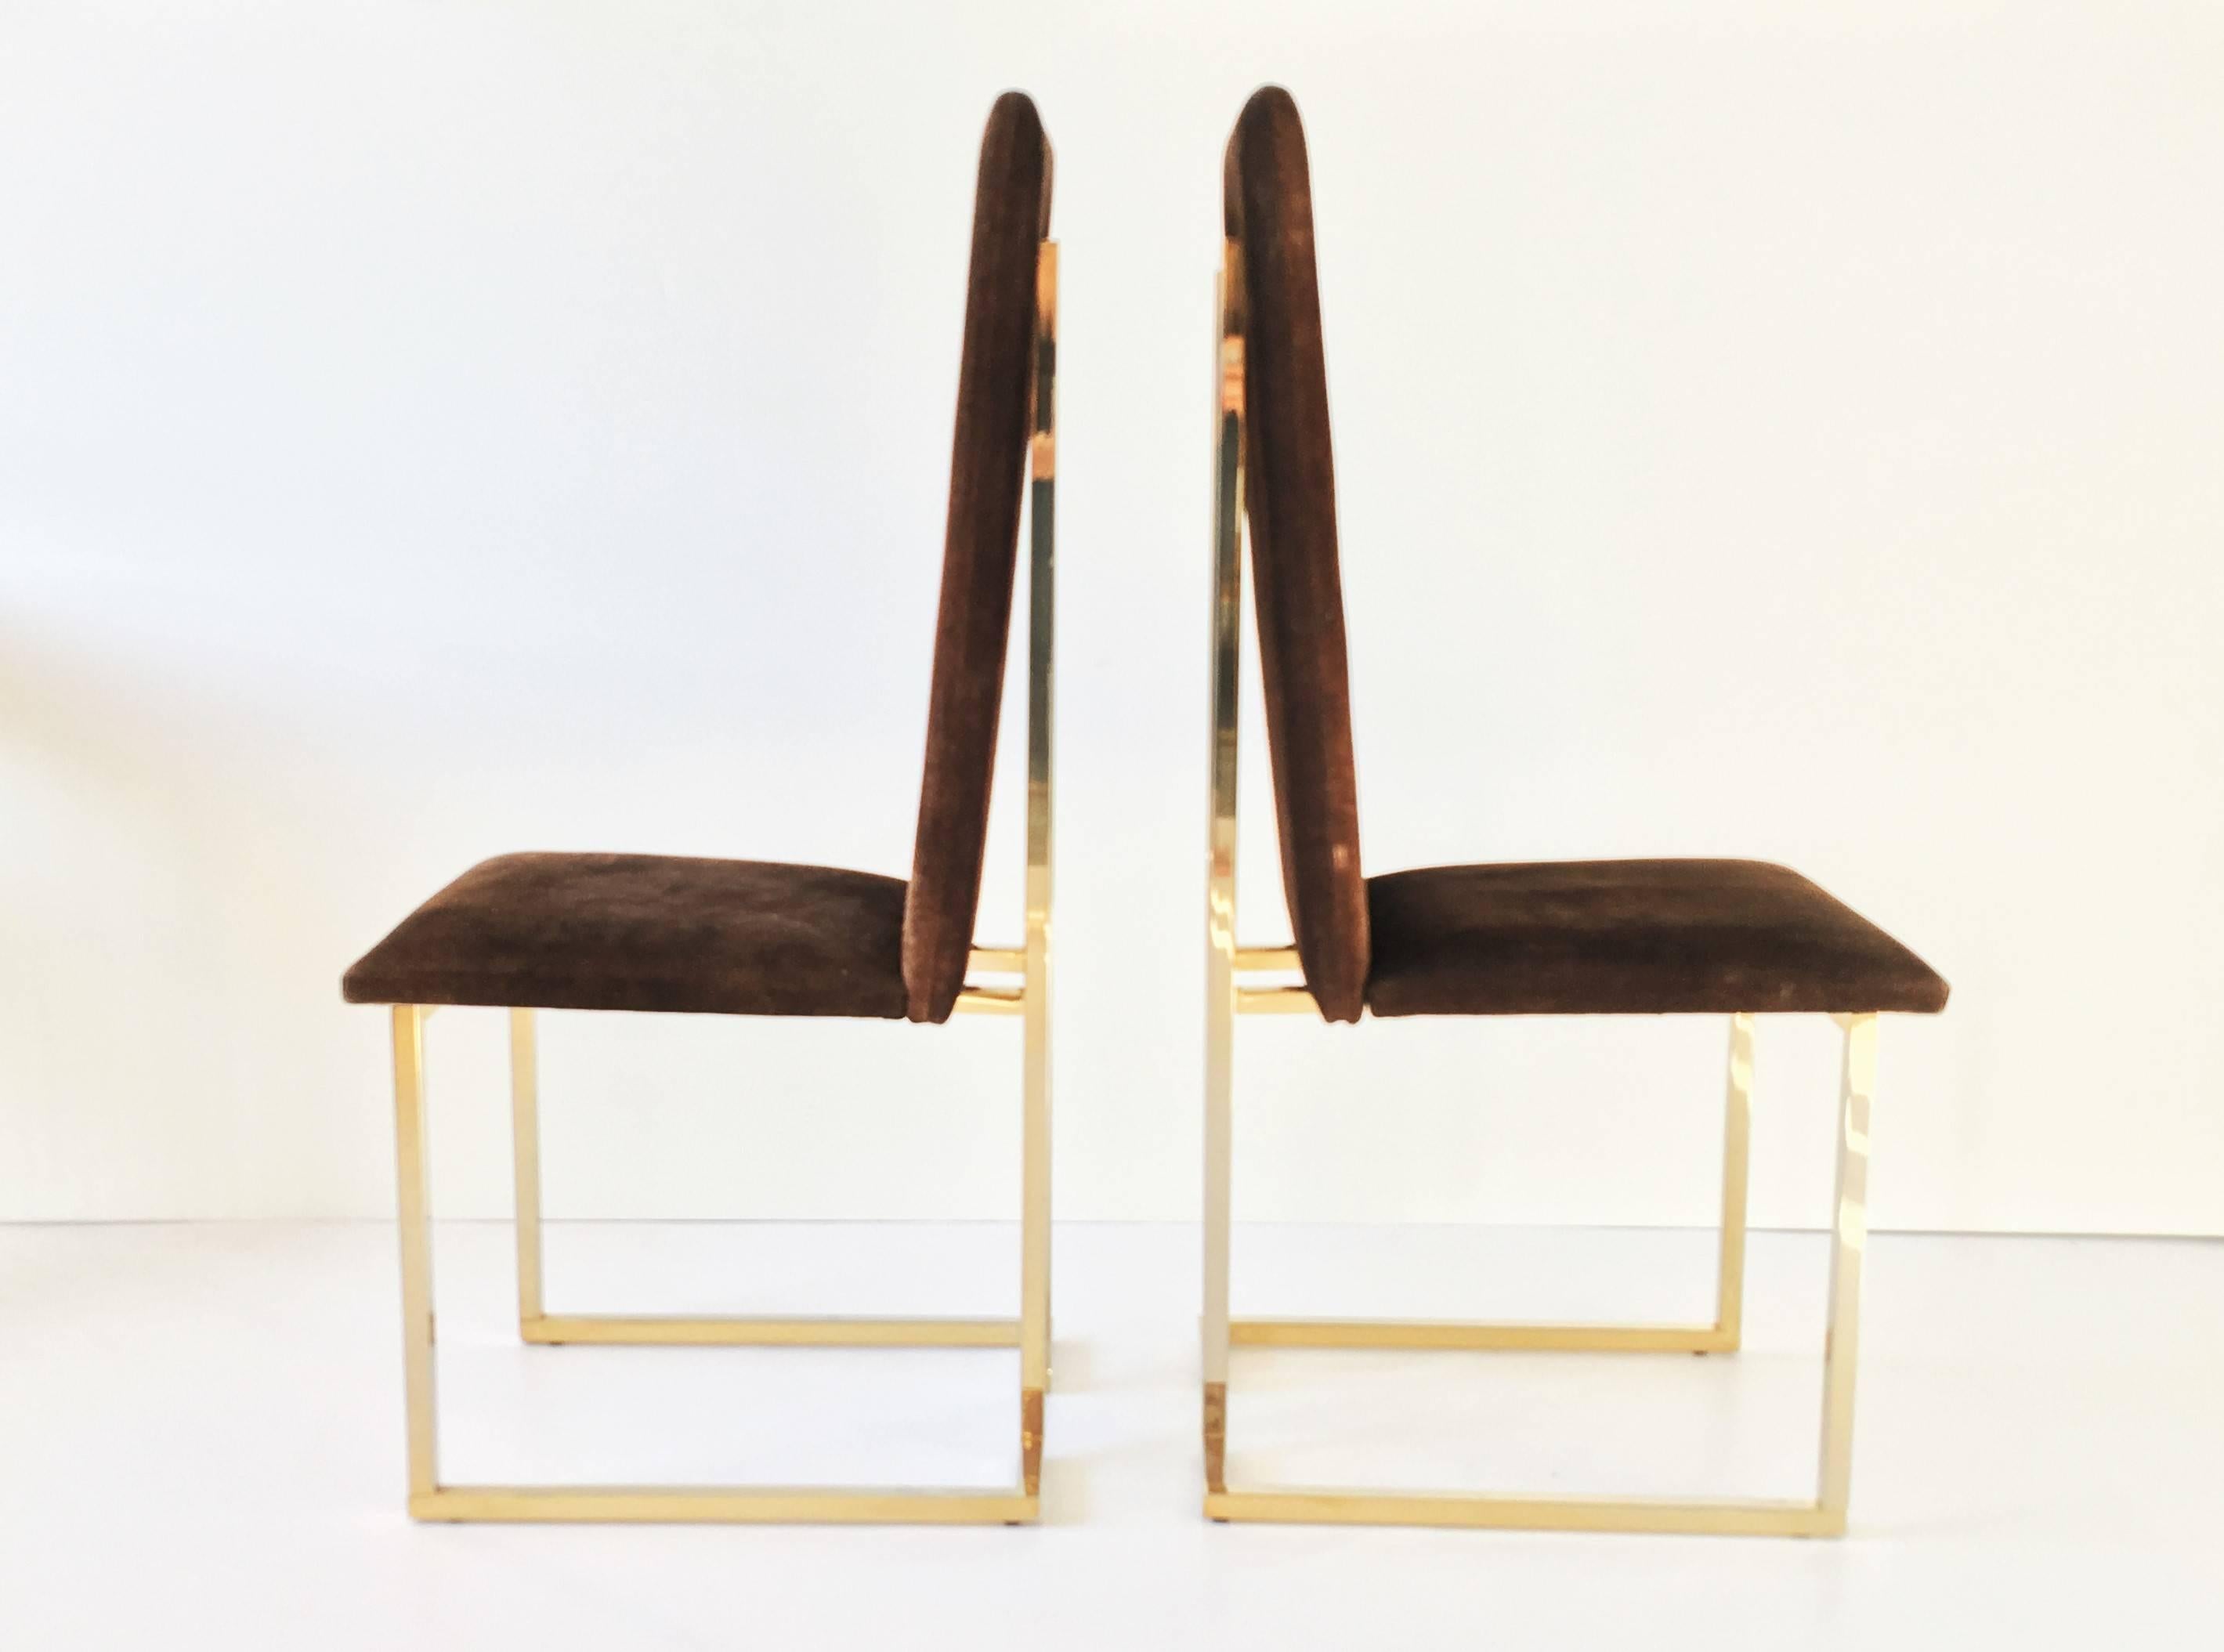 An exceptional pair of French, 1970s brass frame dining chairs. The frames are constructed of square brass tubing with brown suede seats and backs sitting on top of the frame. These are very comfortable, sculptural chairs that will make a lasting